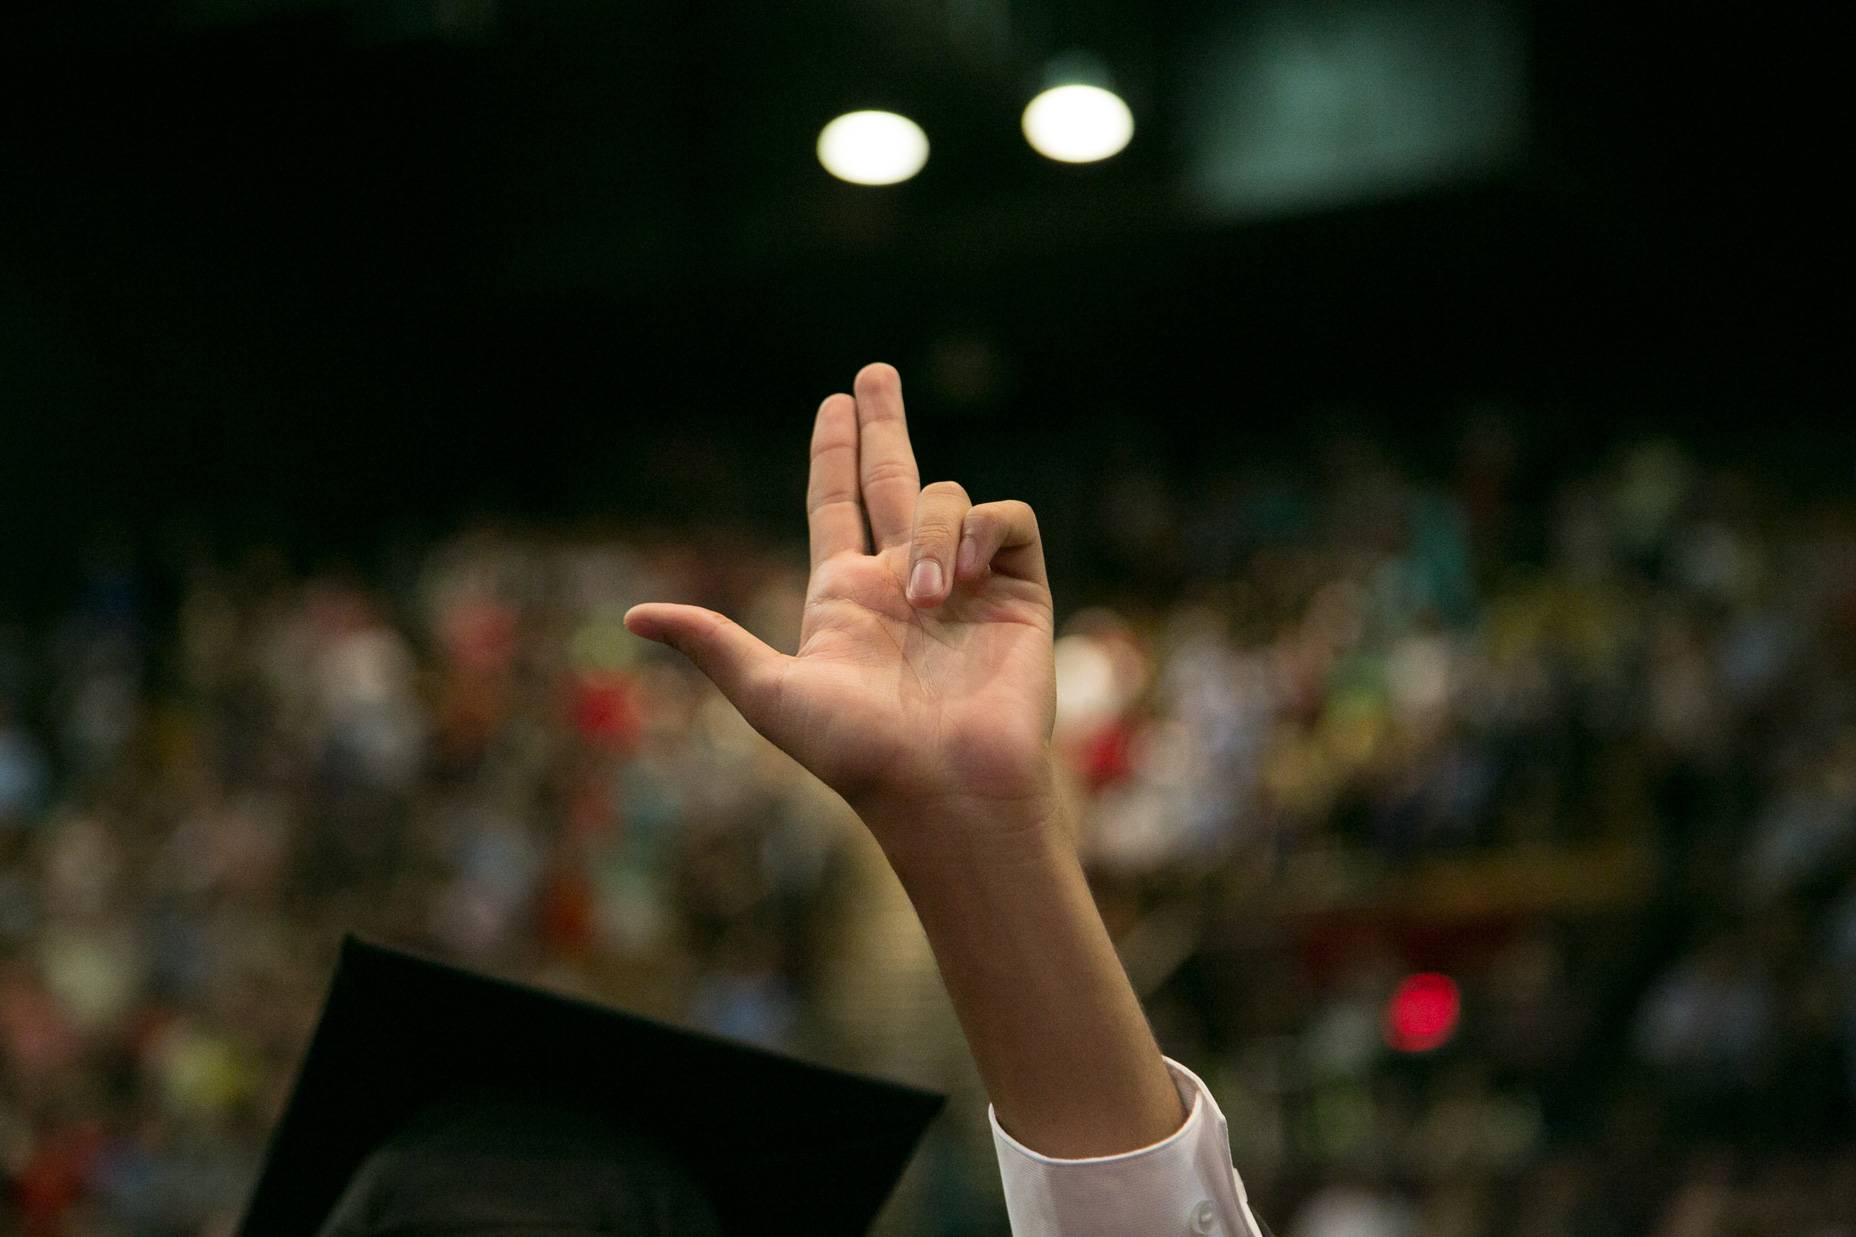 Graduate showing the State of Texas handsign